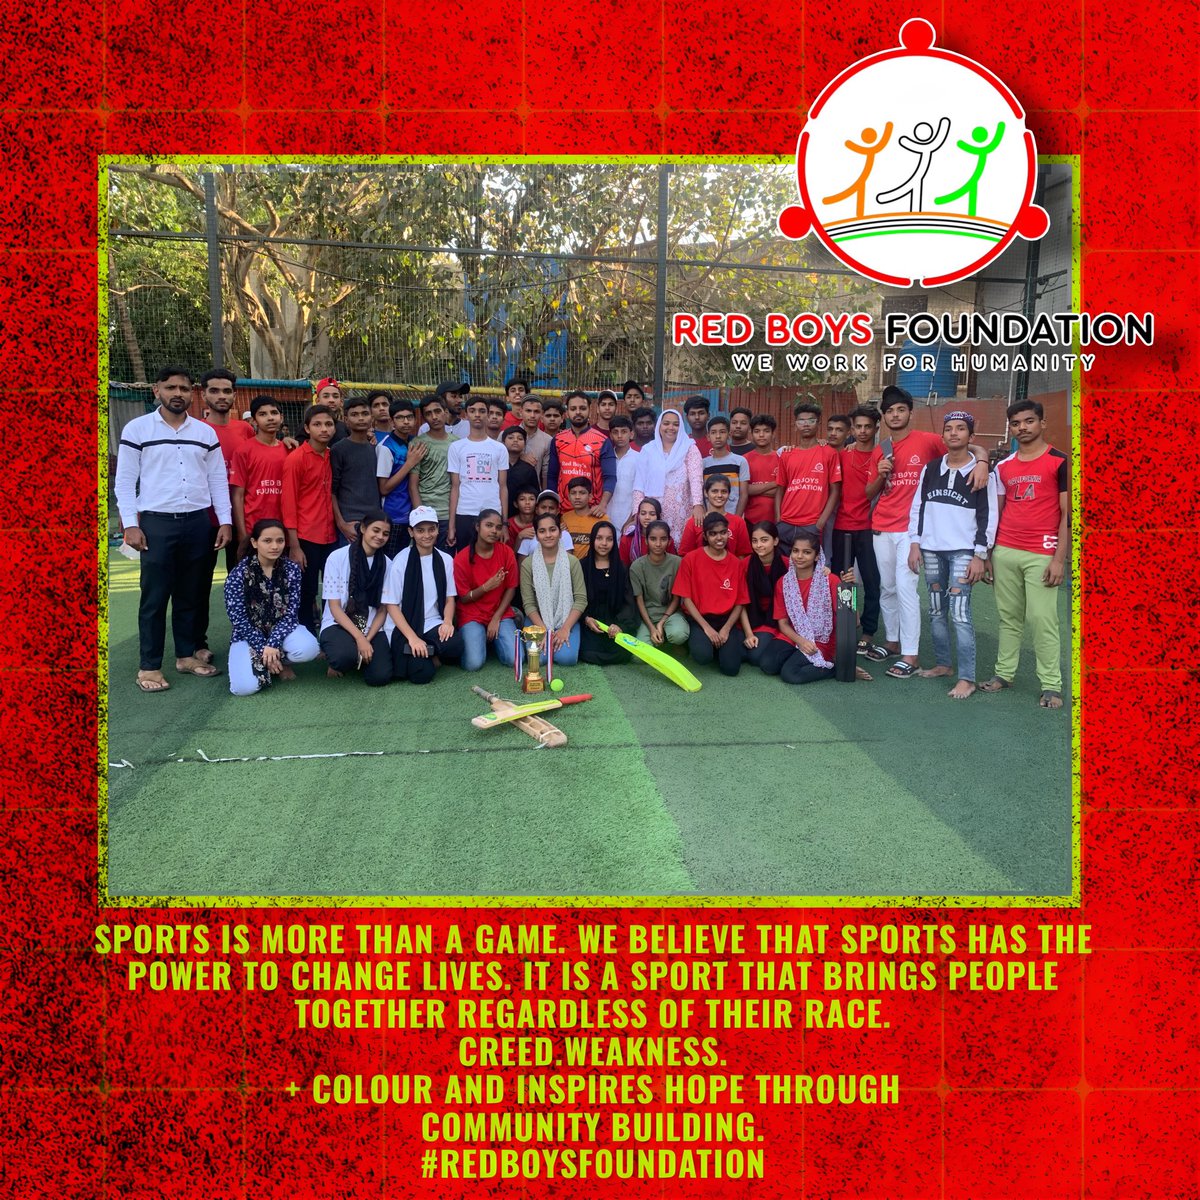 SPORTS IS MORE THAN A GAME. WE BELIEVE THAT SPORTS HAS THE POWER TO CHANGE LIVES. IT IS A SPORT THAT BRINGS PEOPLE TOGETHER REGARDLESS OF THEIR RACE. CREED. WEAKNESS
COLOUR AND INSPIRES HOPE THROUGH COMMUNITY BUILDING
#redboysfoundation #sportsfordevelopment #ngo #mumbai #bandra